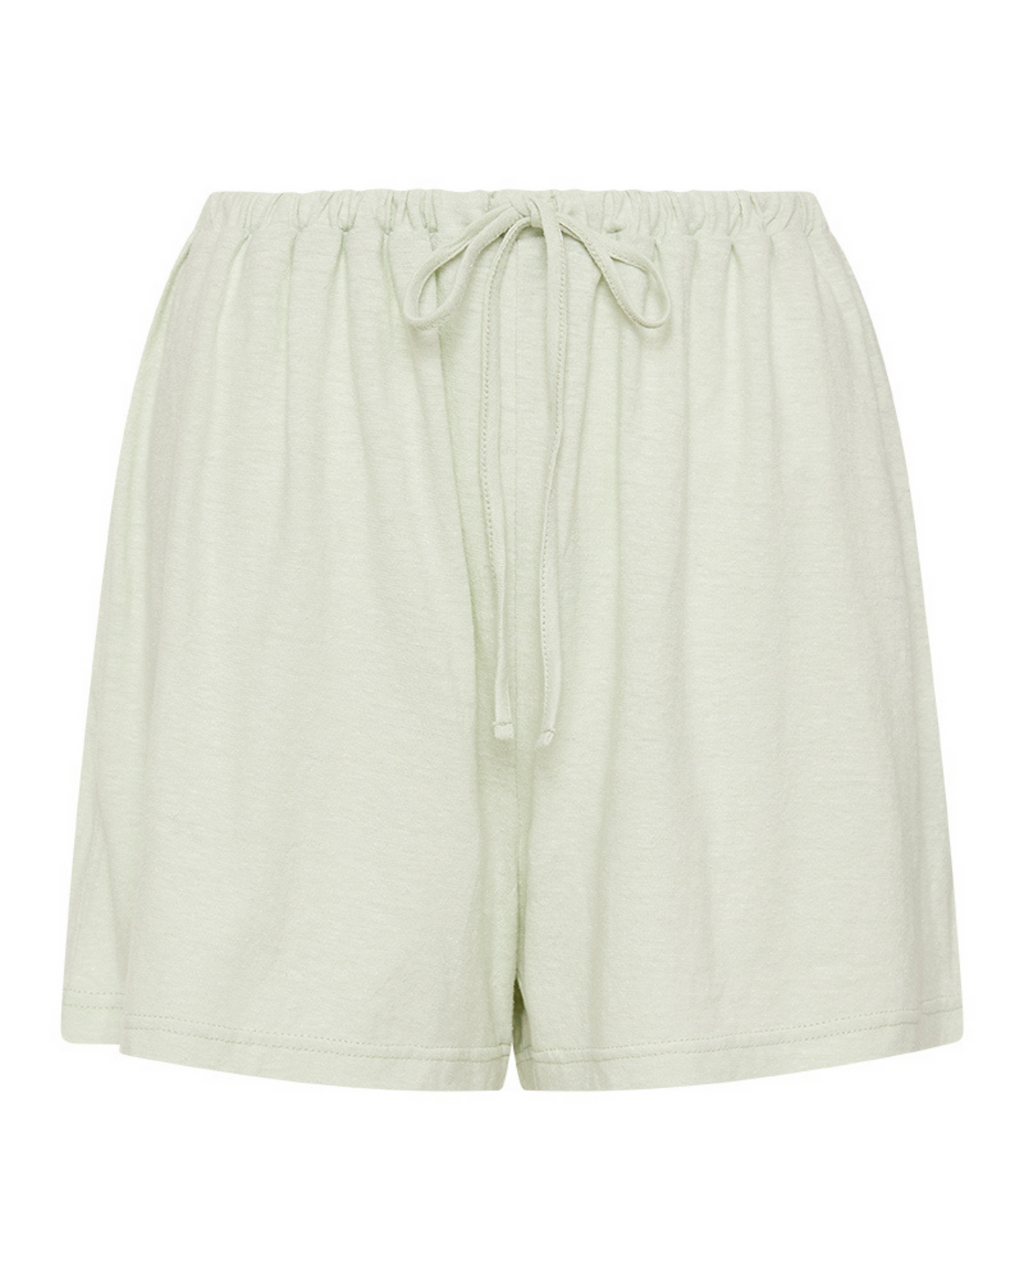 THE LOUNGE SHORT